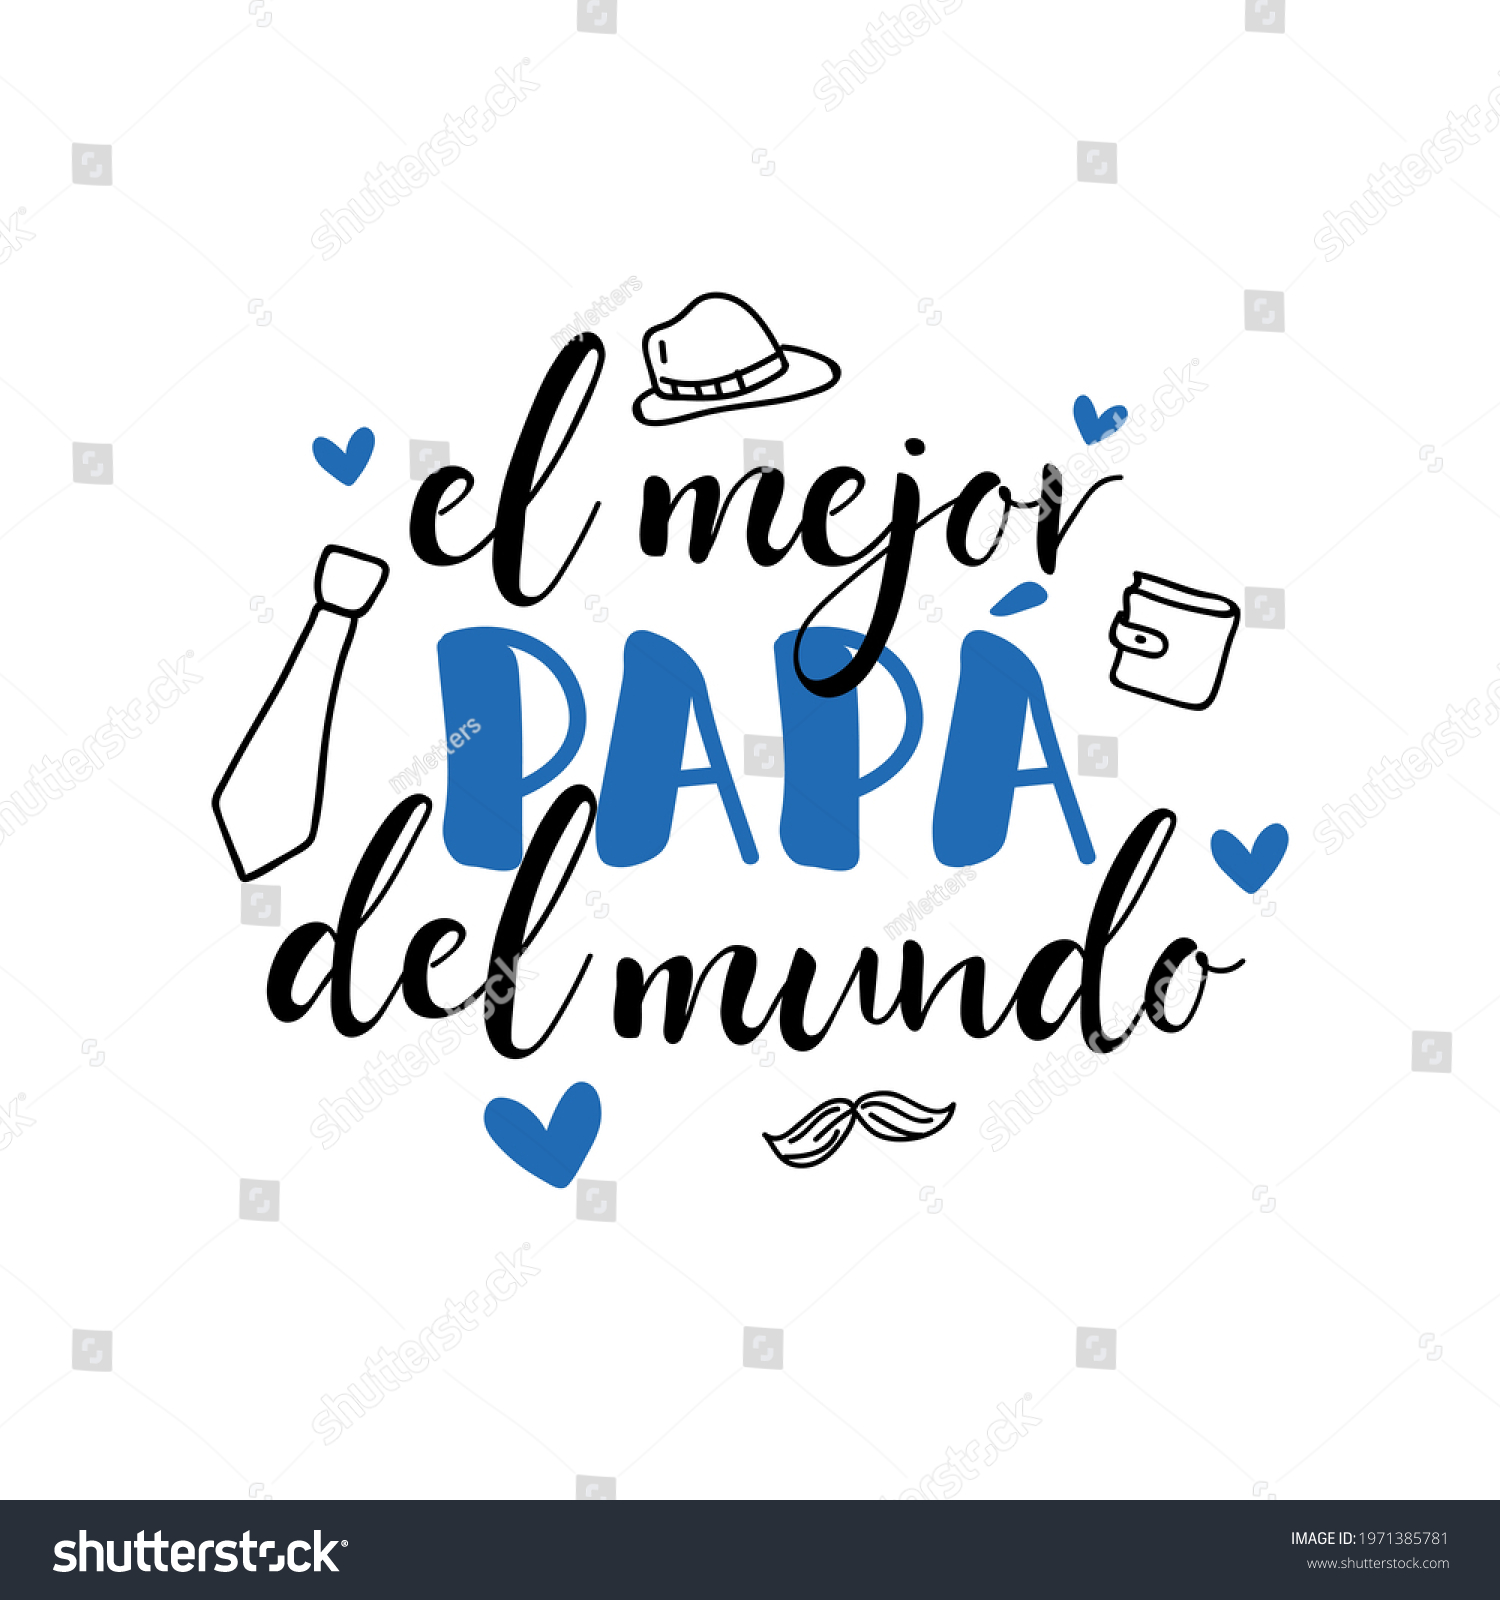 62 Padre latino Images, Stock Photos & Vectors | Shutterstock